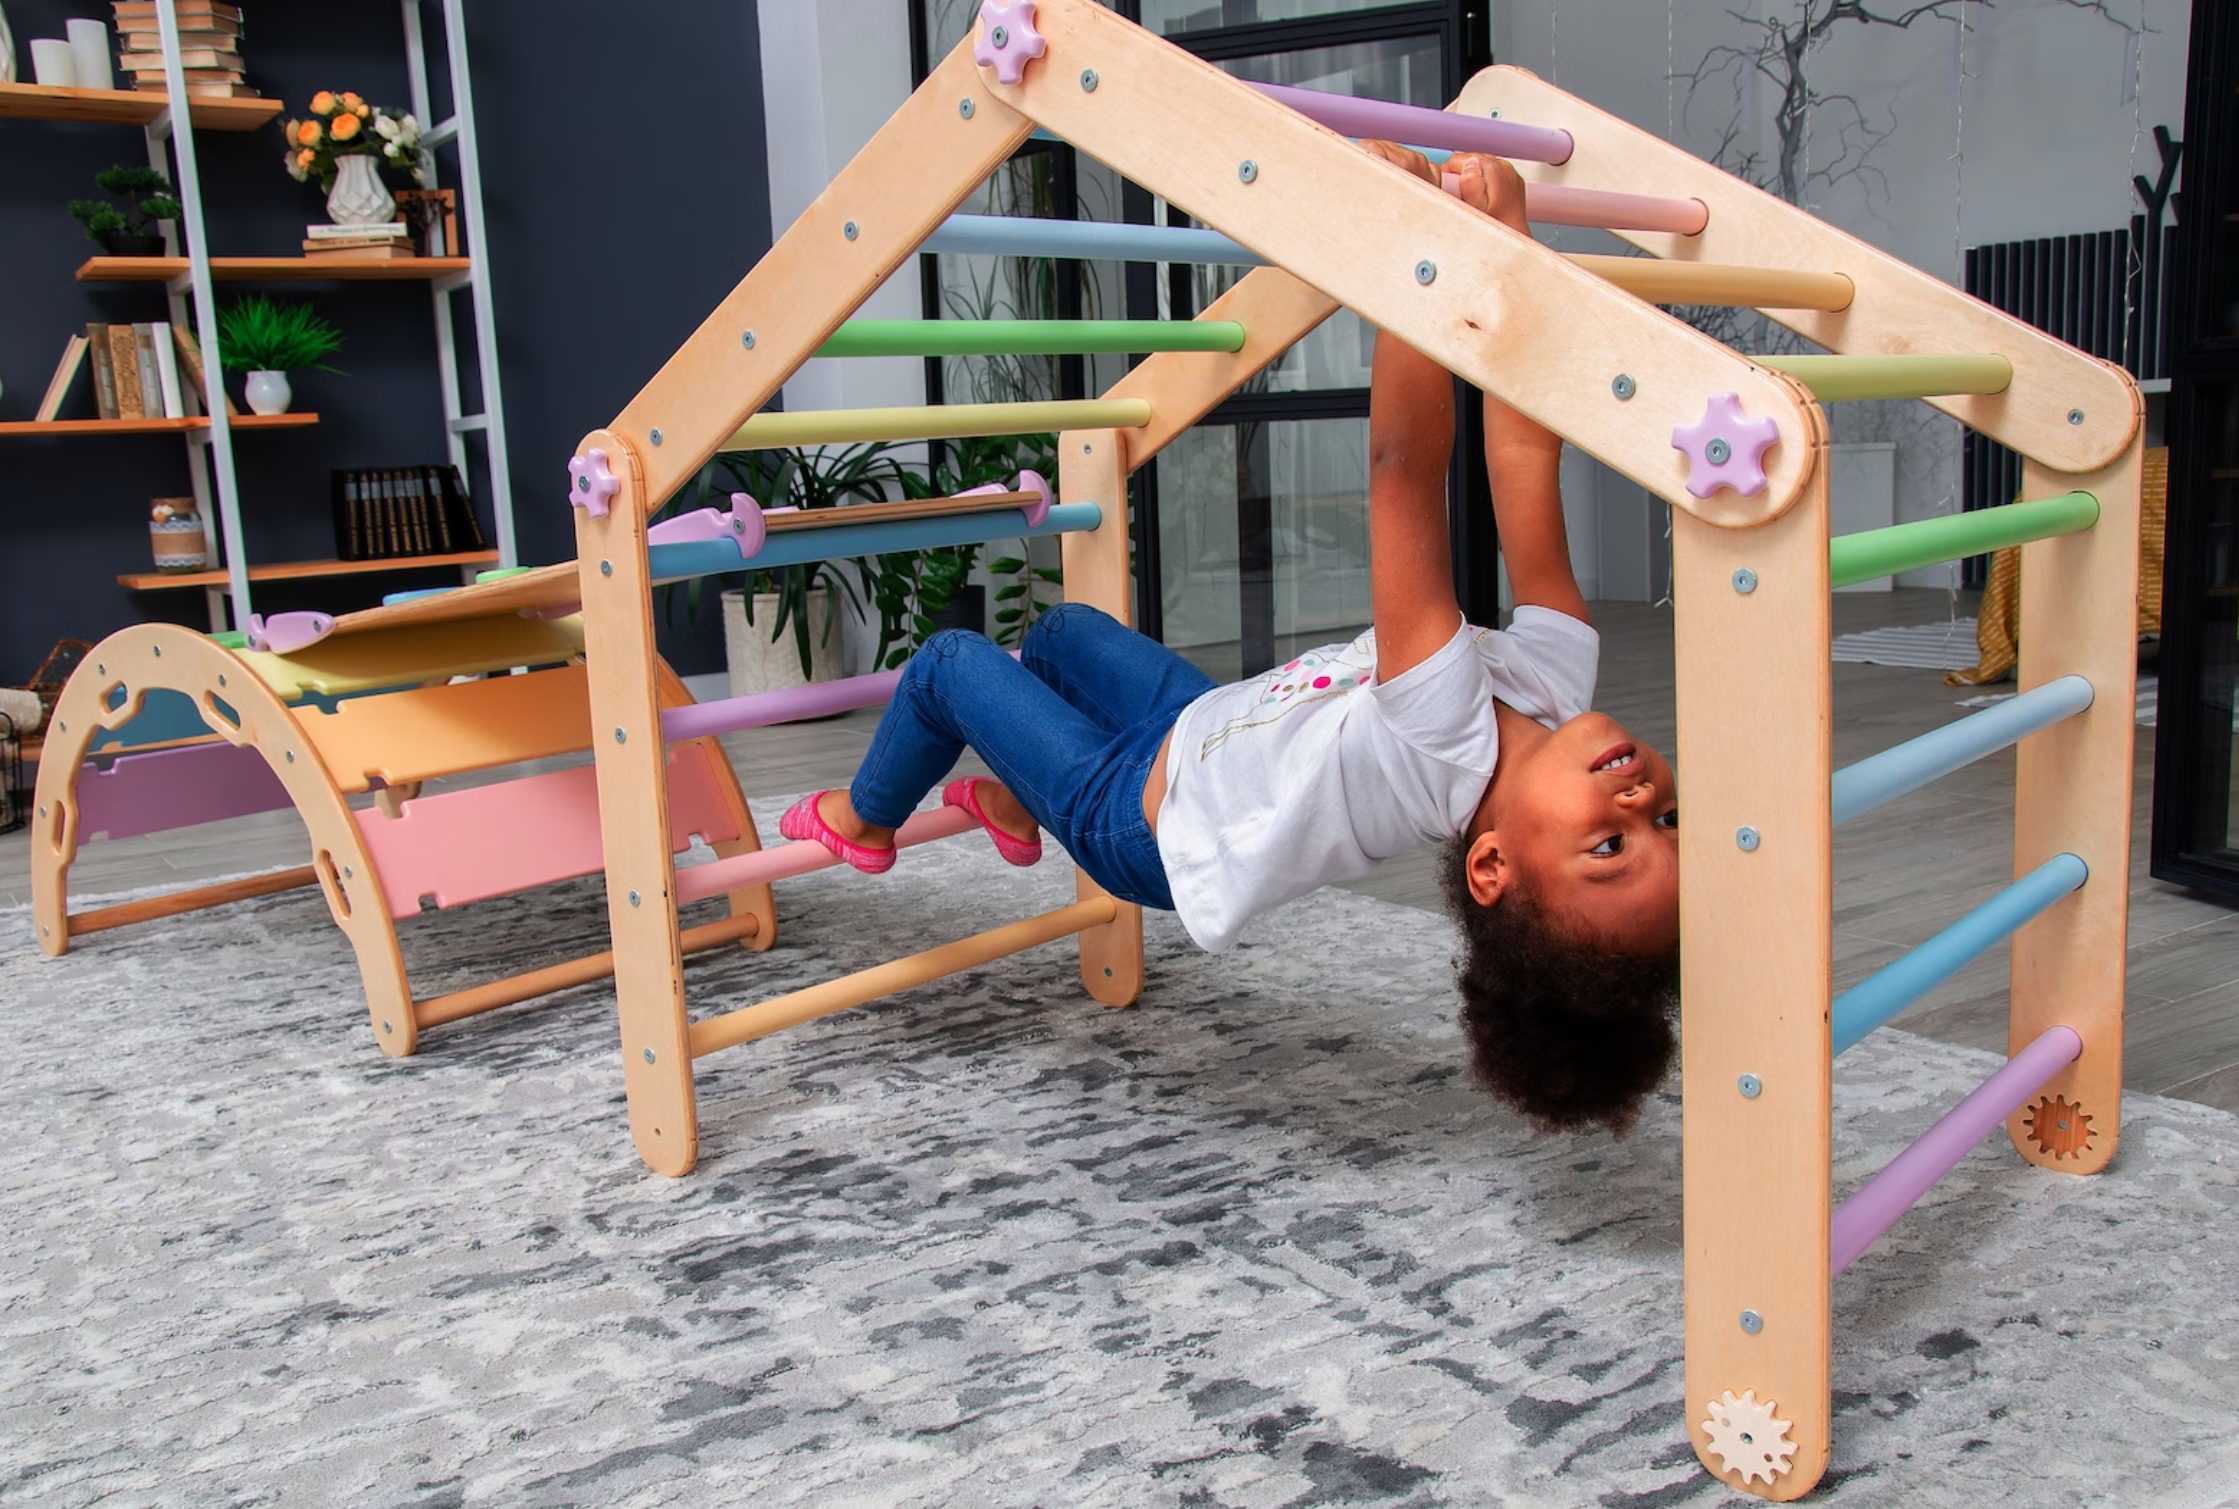 A little girl hangs on a transforming climbing triangle in the shape of a house.